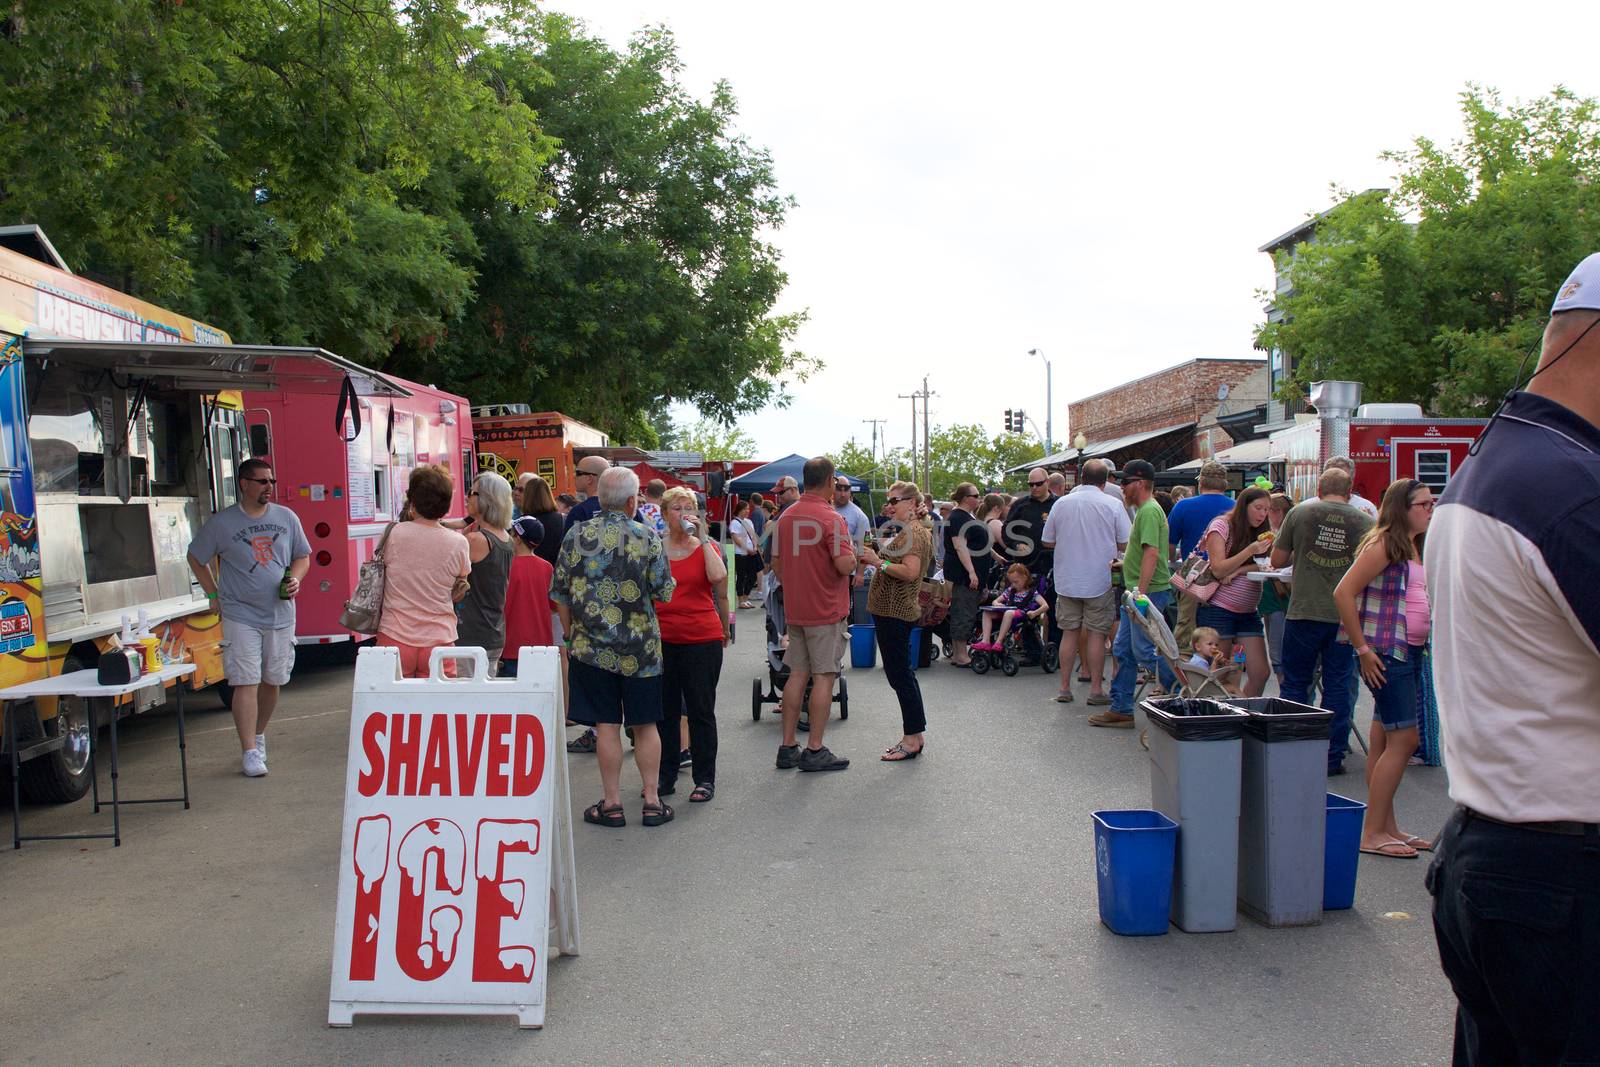 Lincoln, CA - July 7, 2015 - A busy night at Food Truck Mania in Lincoln as many locals enjoy the various food truck options